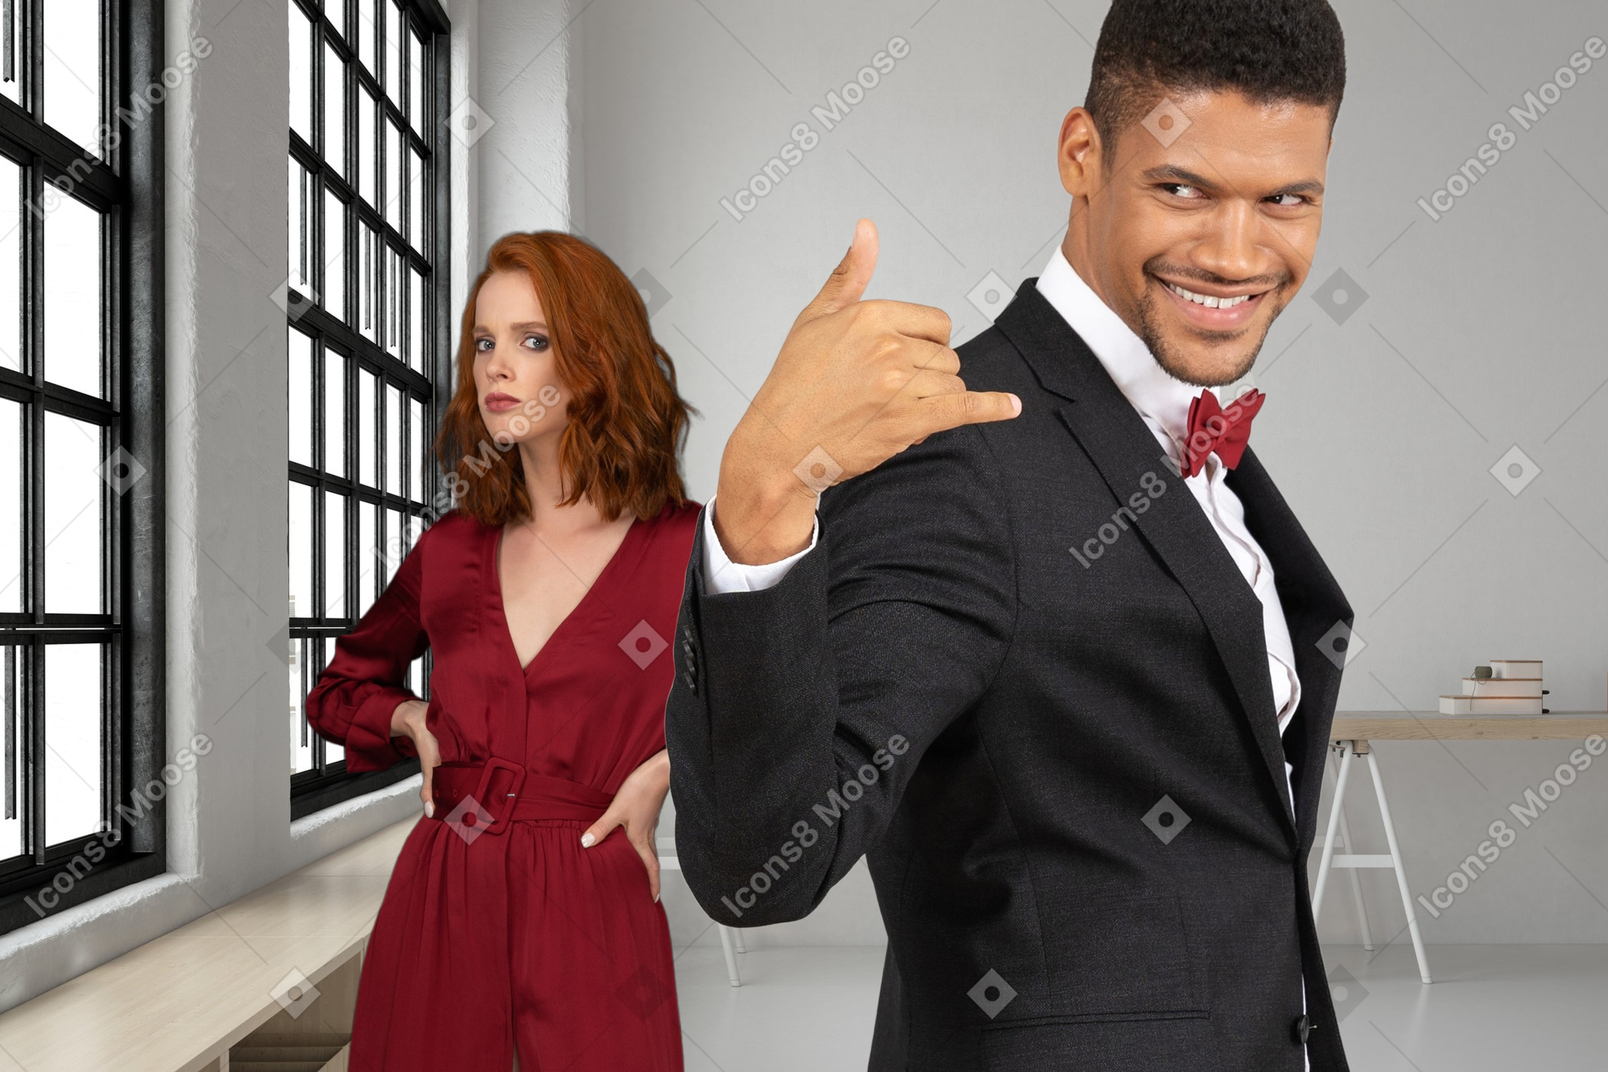 A woman suspicious of a man making a "call me" gesture